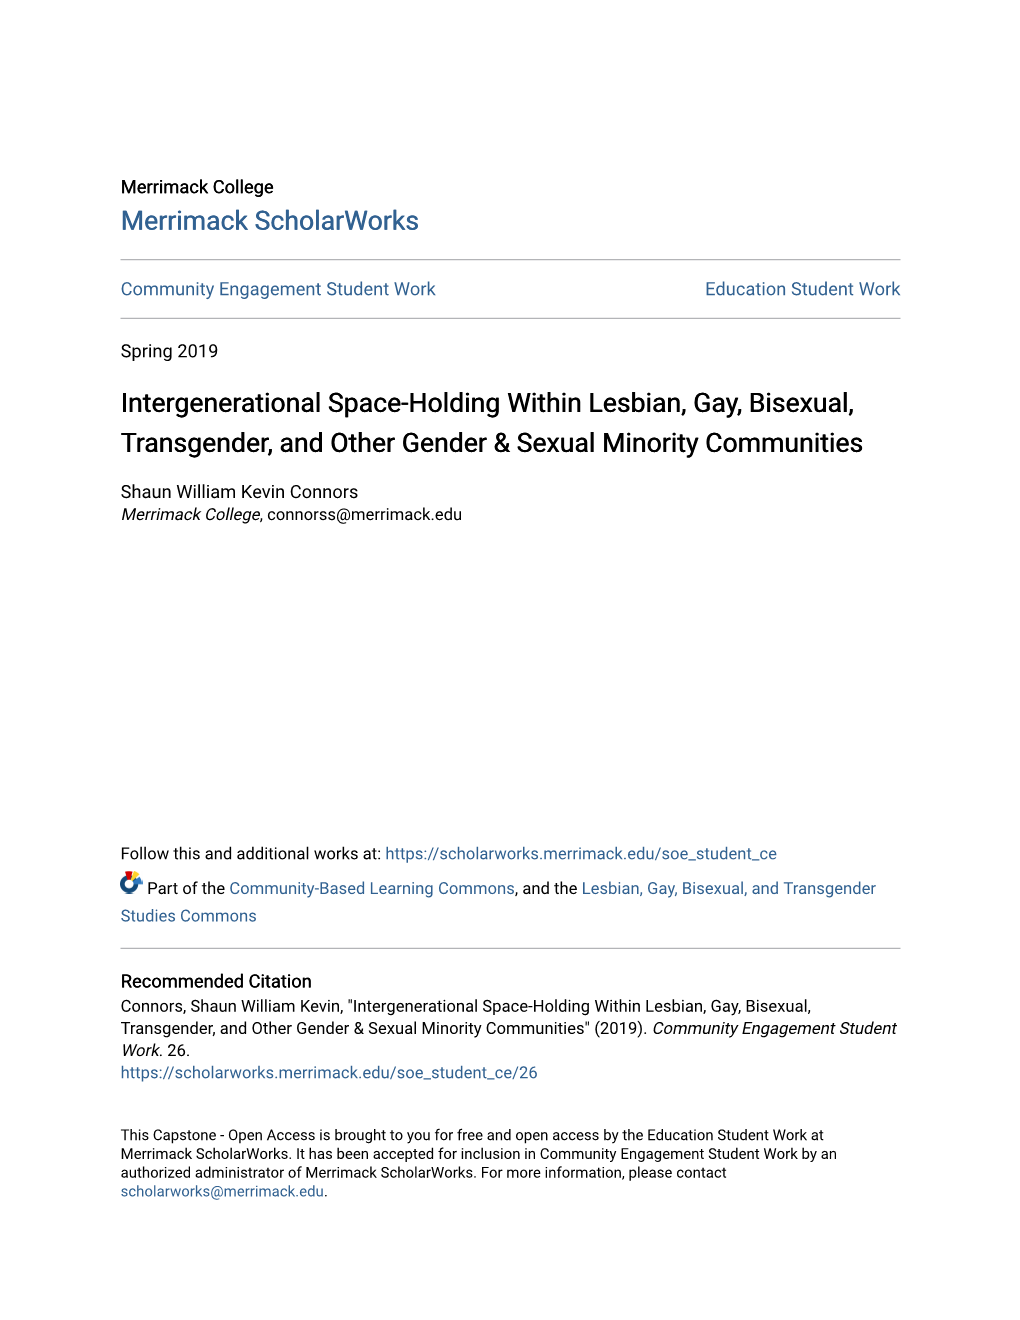 Intergenerational Space-Holding Within Lesbian, Gay, Bisexual, Transgender, and Other Gender & Sexual Minority Communities